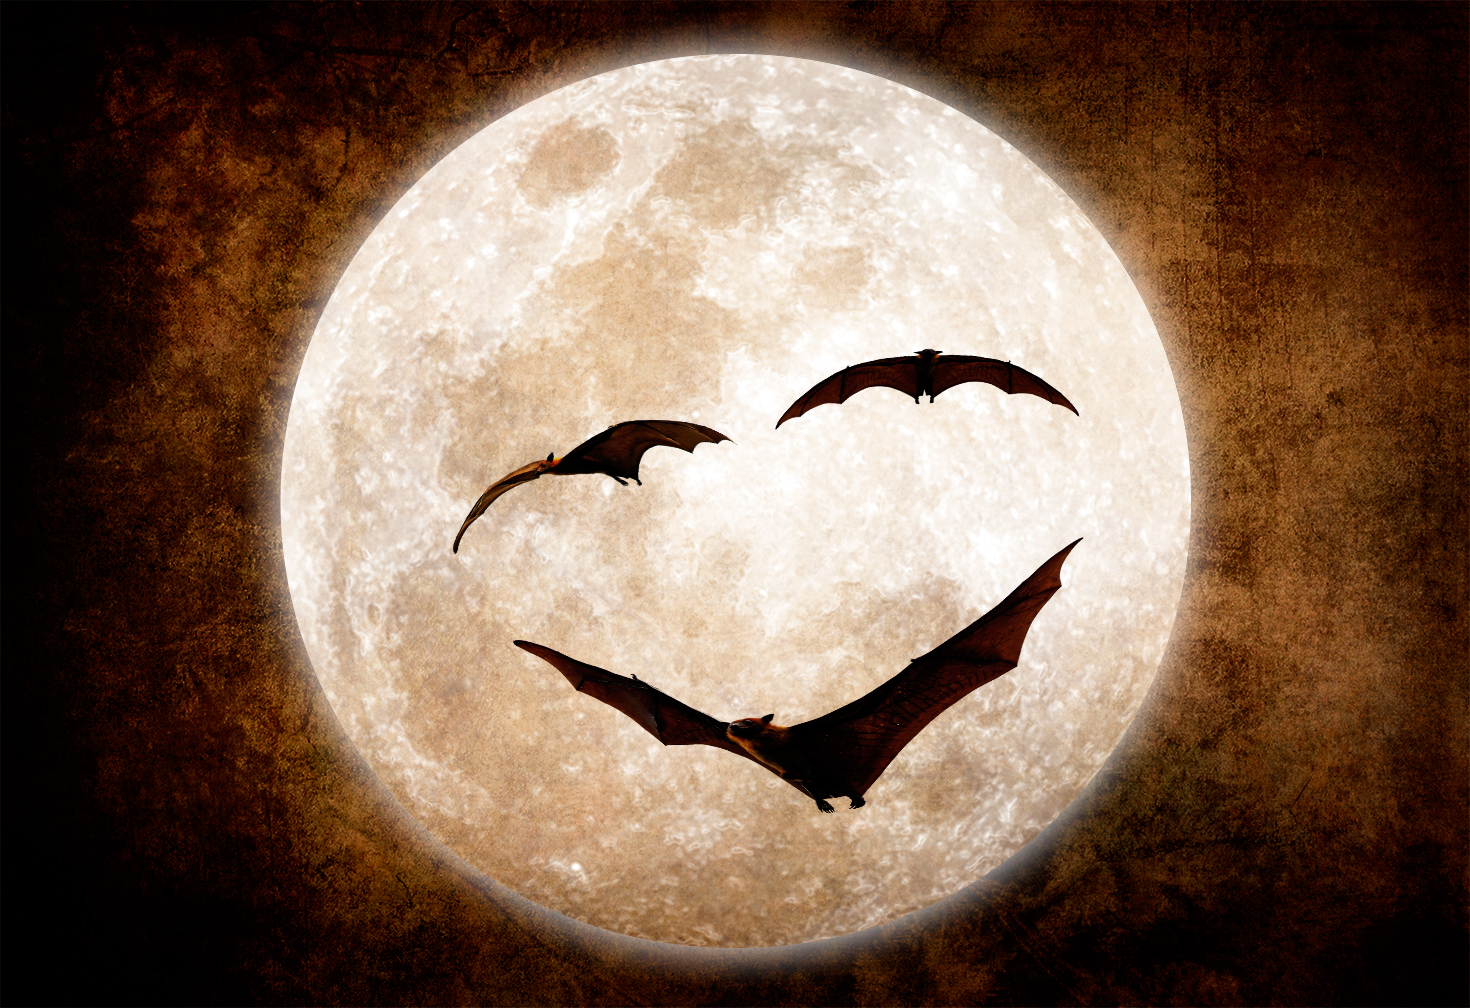 Bats composited against a moon in Photoshop make a Halloween happy face